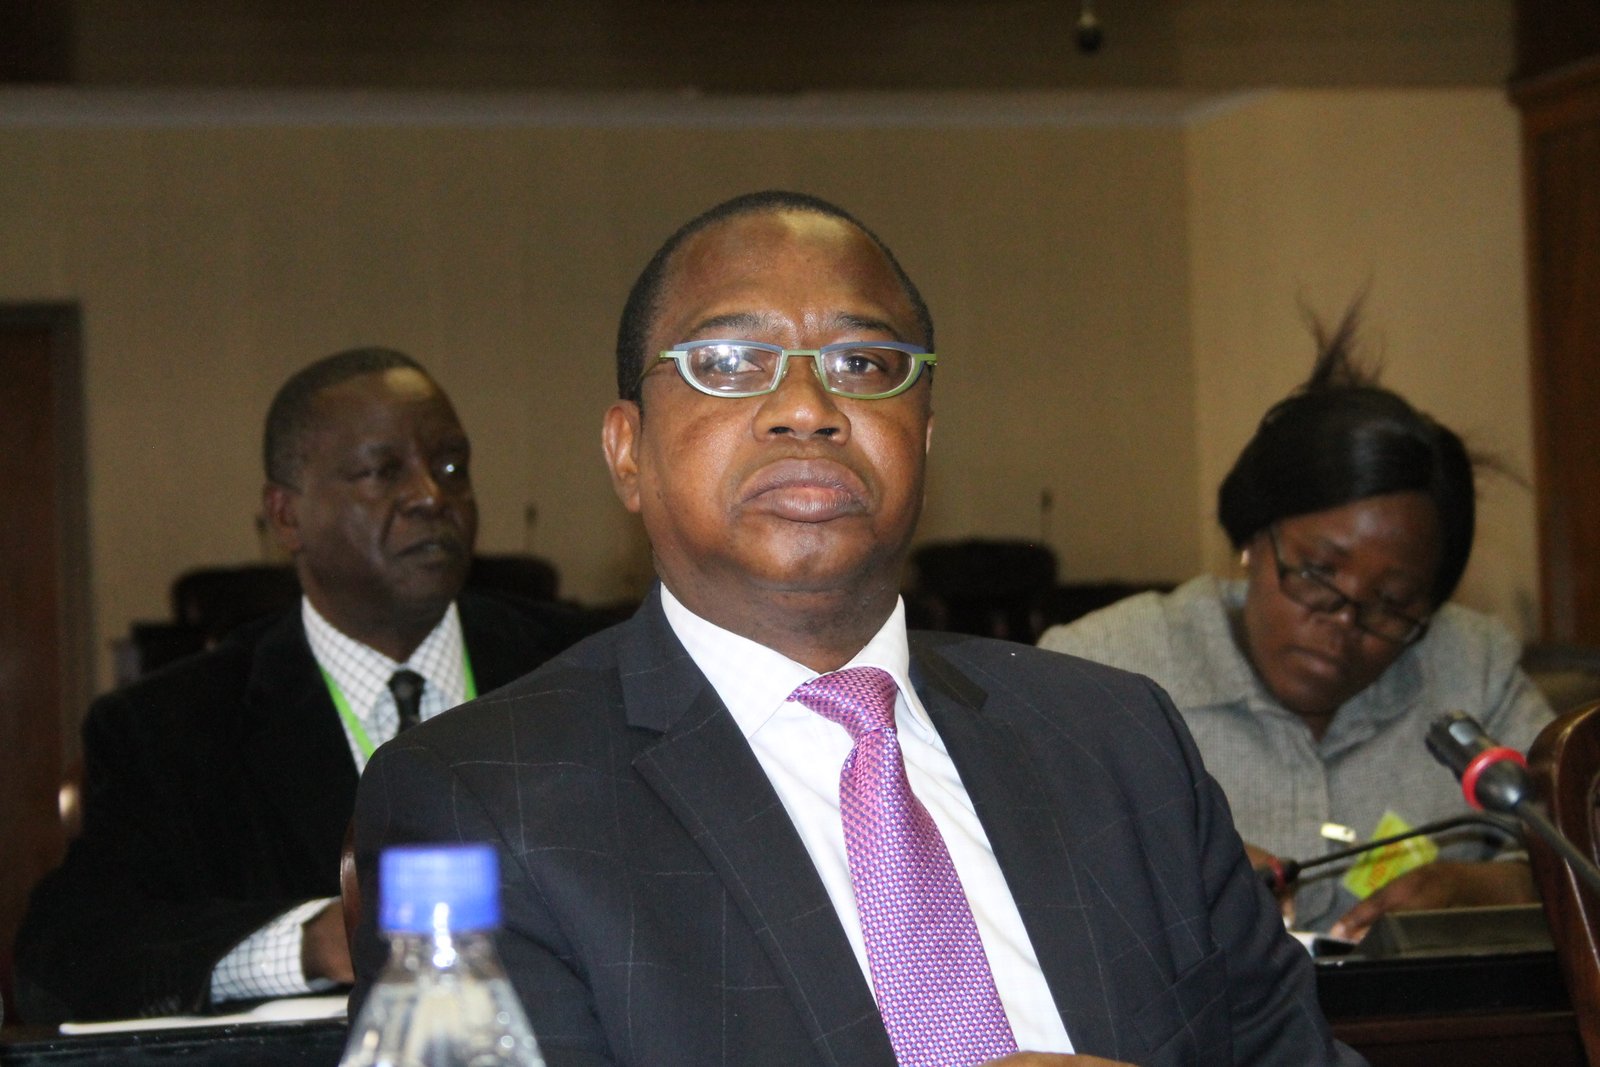 We have used US$140 million on vaccines so far says Mthuli Ncube